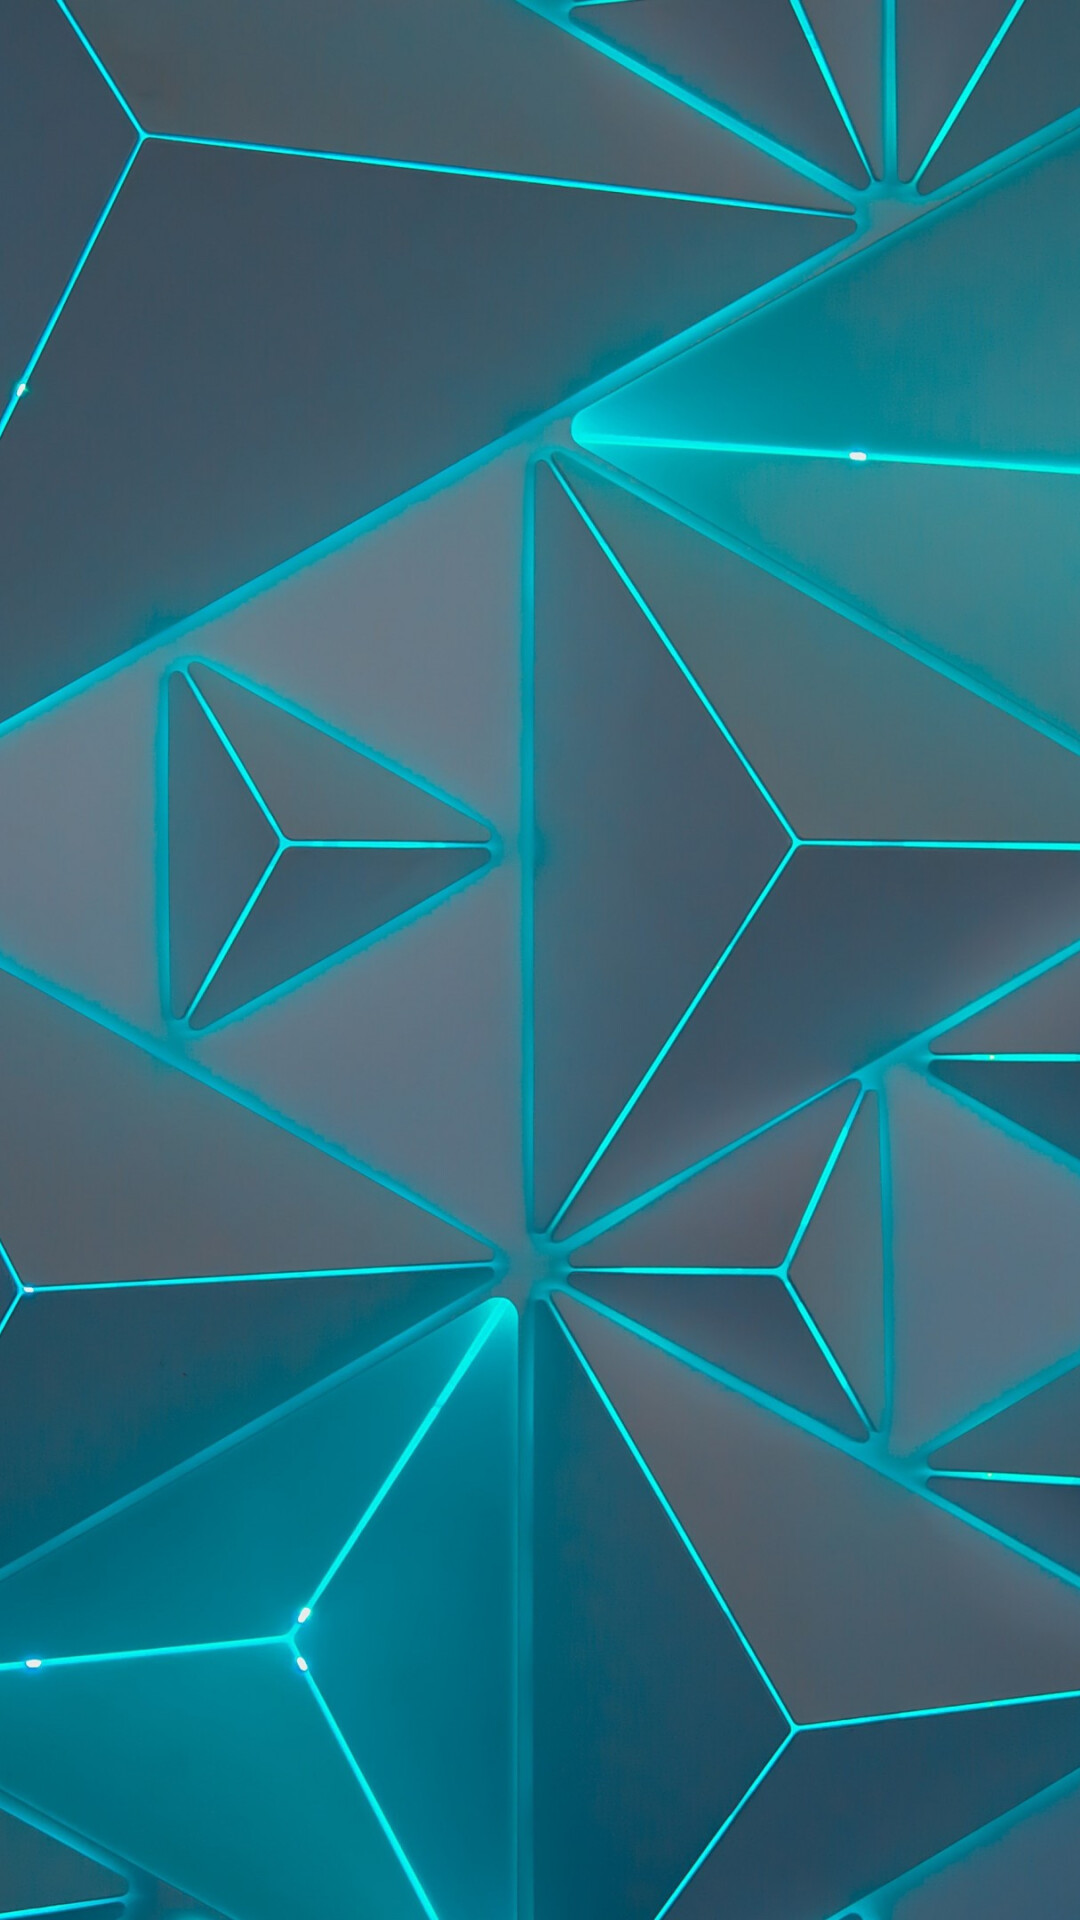 Geometry: Neon light triangles, Complementary angles, Pyramids. 1080x1920 Full HD Wallpaper.